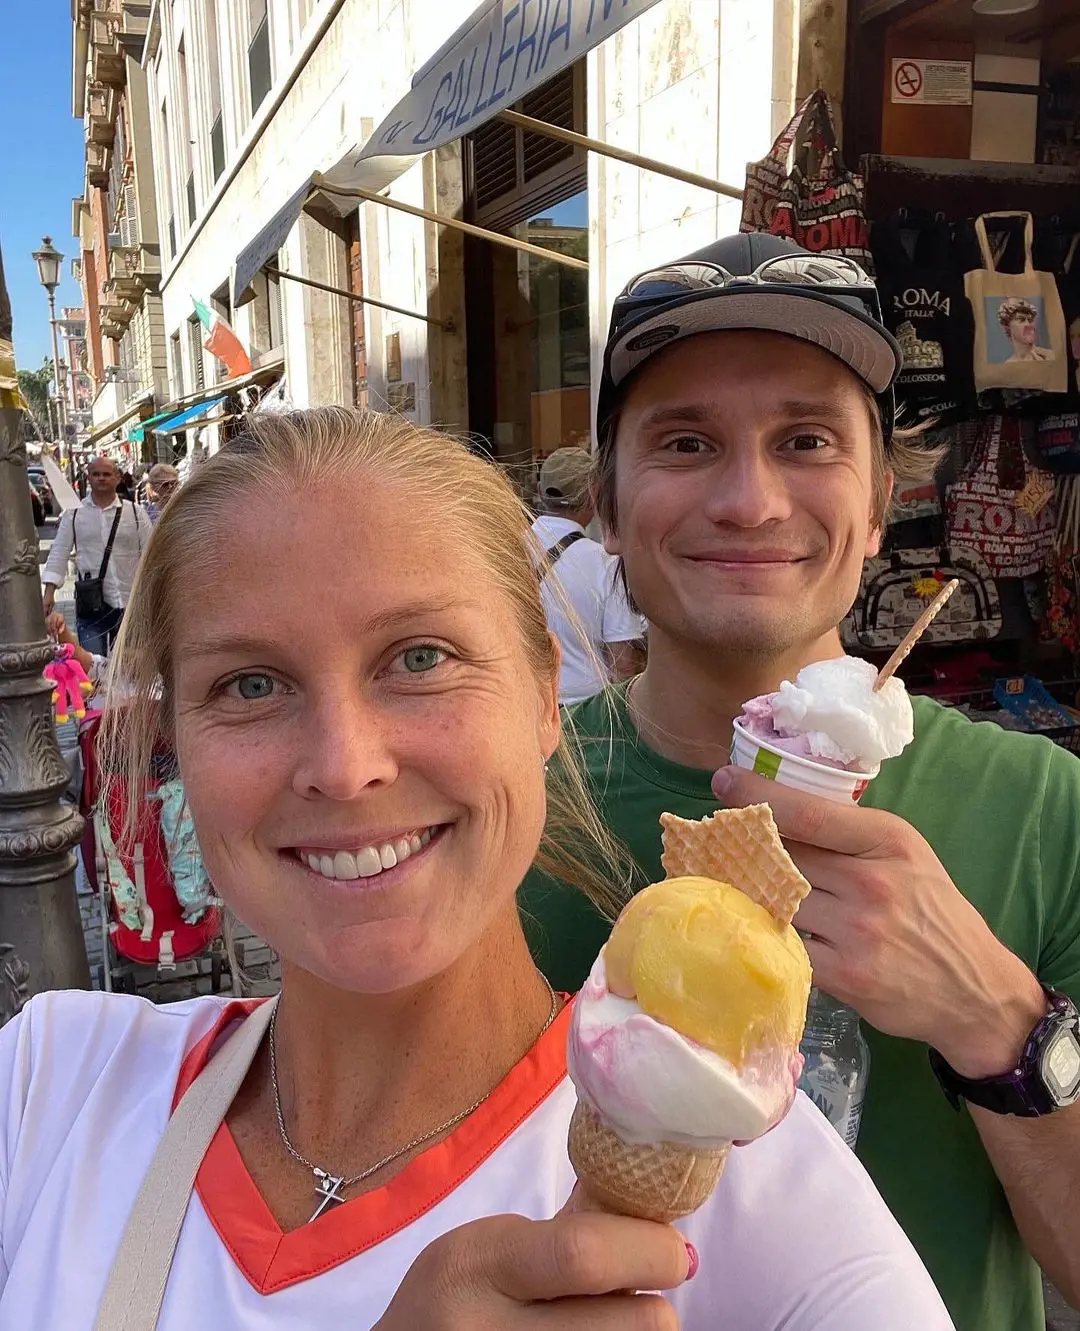 Shelby and John strolling in the city of Rome enjoying ice cream on a hot day in May 2022